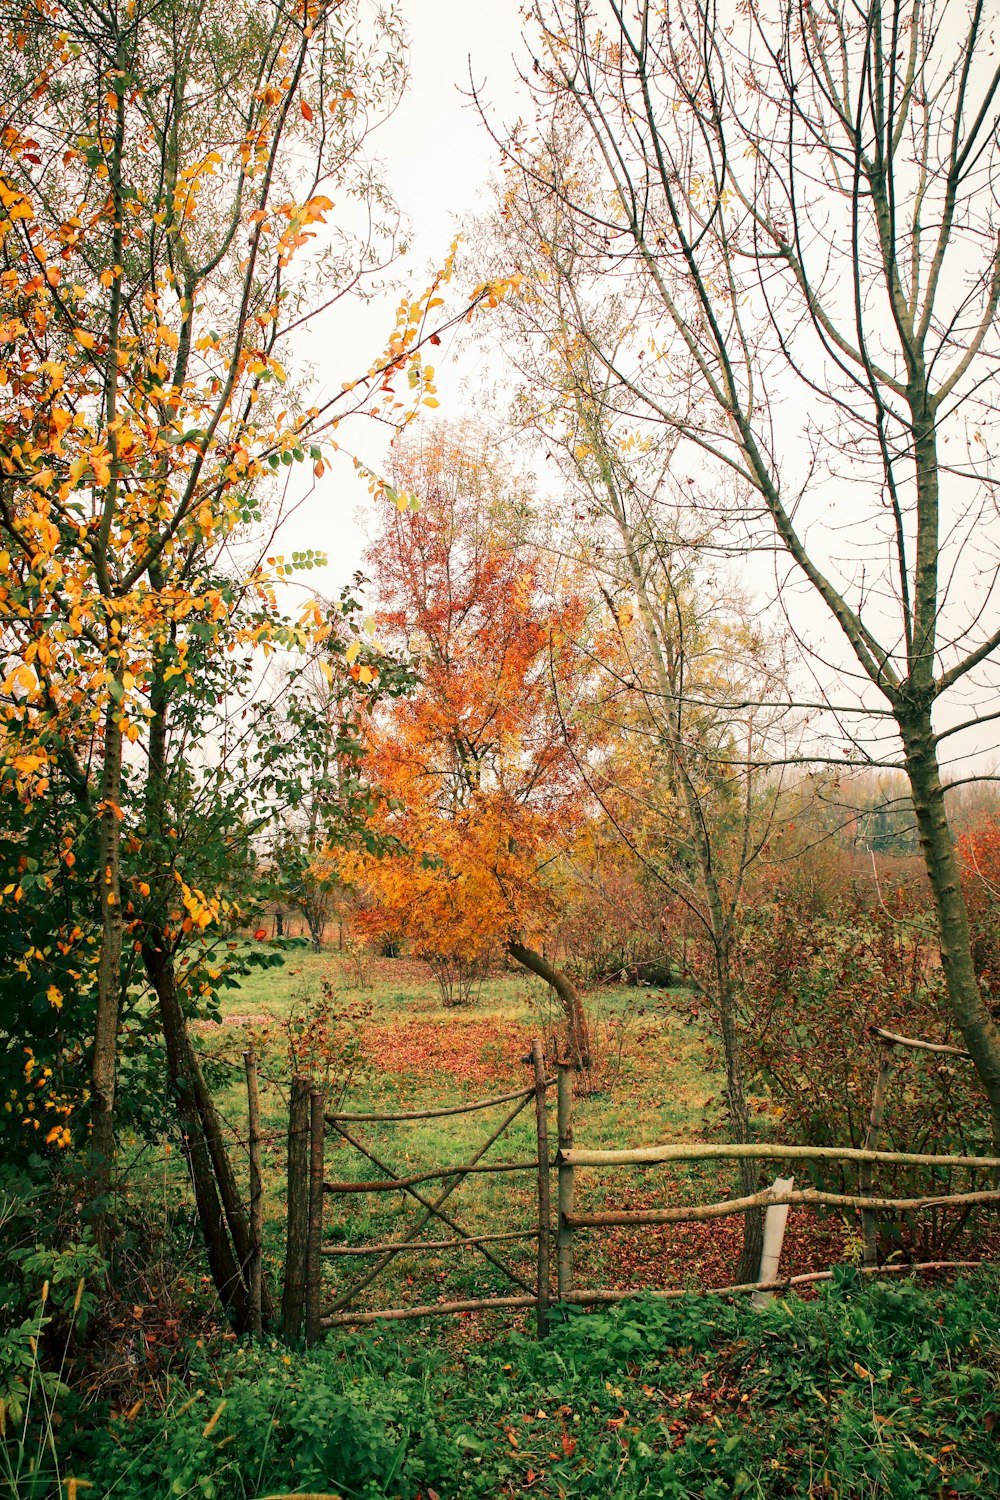 a fence and trees with orange leaves